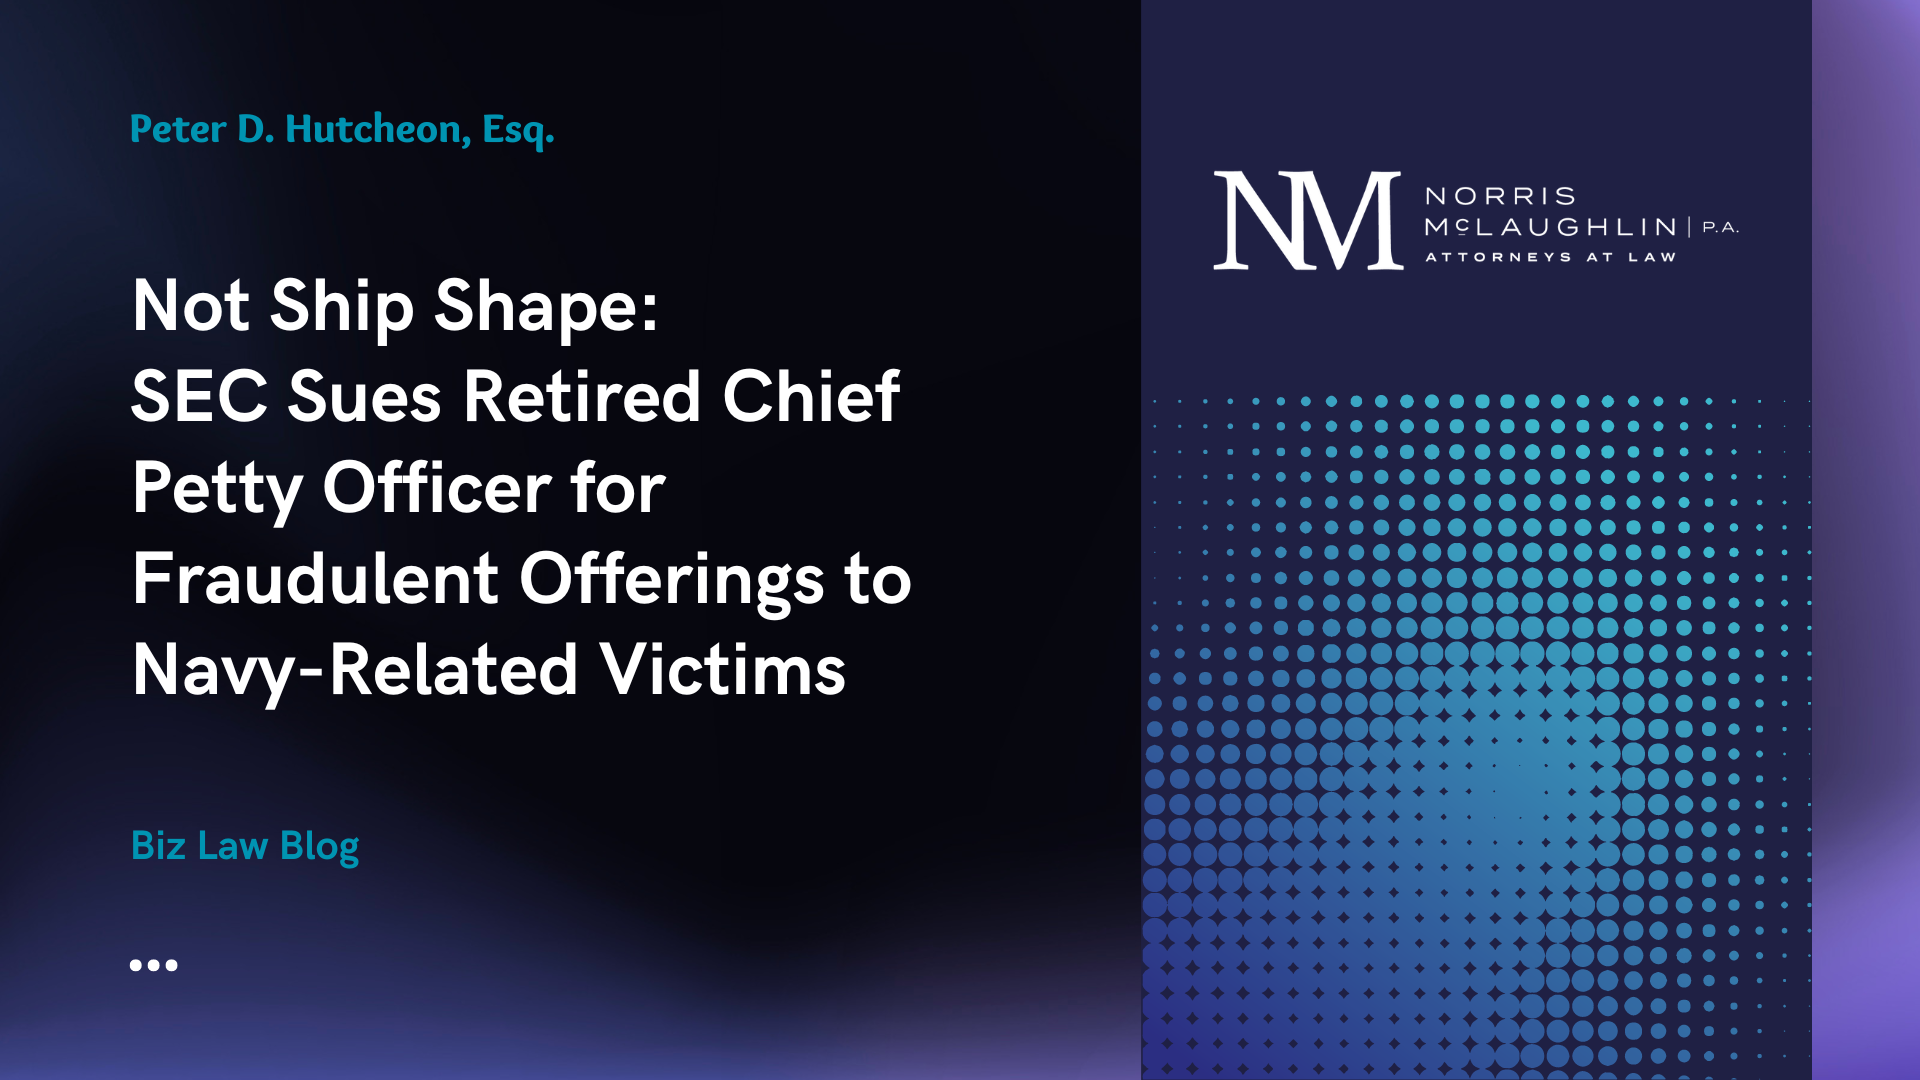 Not Ship Shape: SEC Sues Retired Chief Petty Officer for Fraudulent Offerings to Navy-Related Victims